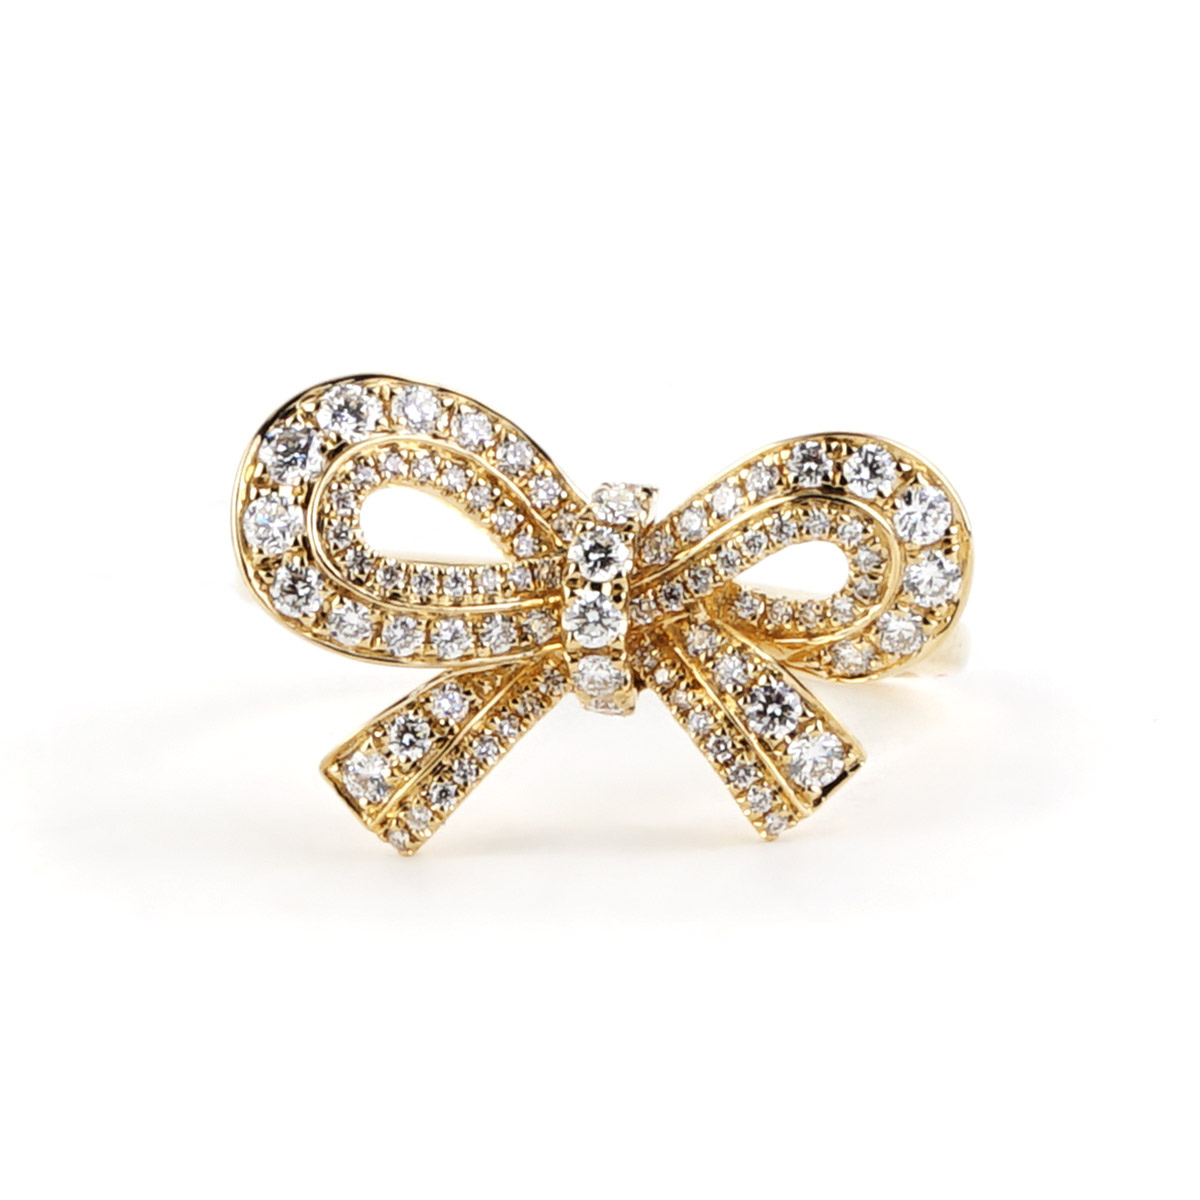 0.45ct. Diamond Bow Ring in Yellow Gold | New York Jewelers Chicago